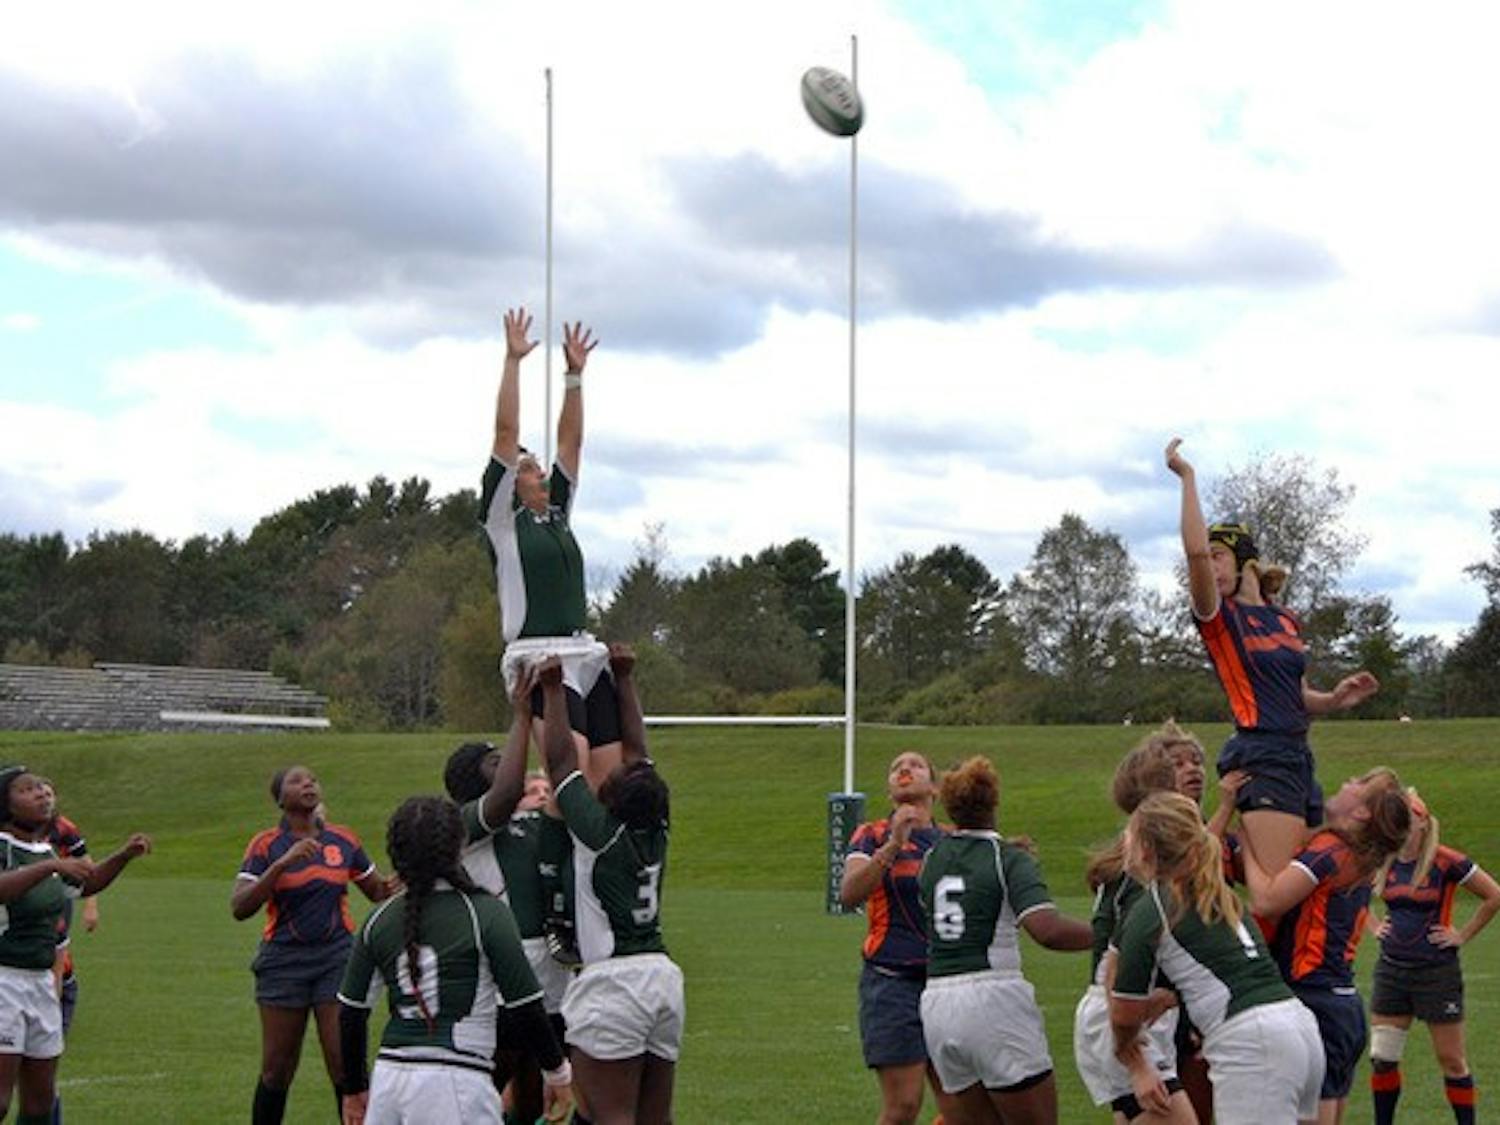 The women's rugby team defeated Cornell University, 29-12, on Saturday in the last game of its fall 15s season.